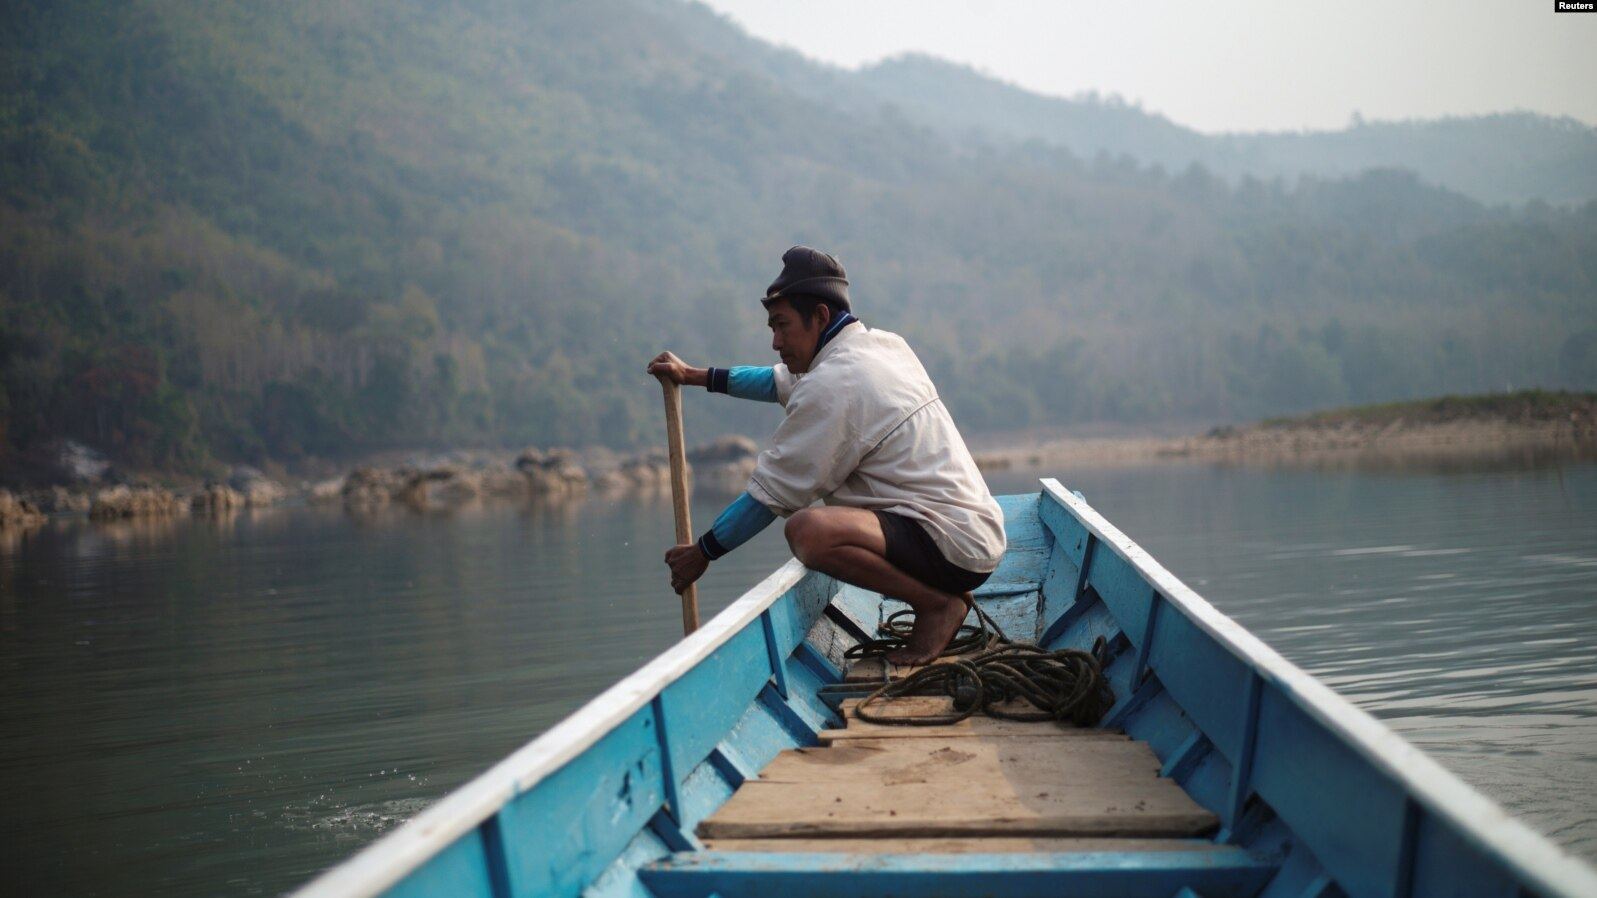 A local villager drives a boat where the future site of the Luang Prabang dam will be on the Mekong River, on the outskirts  of Luang Prabang province, Laos, on February 5 last year. Photo: Reuters